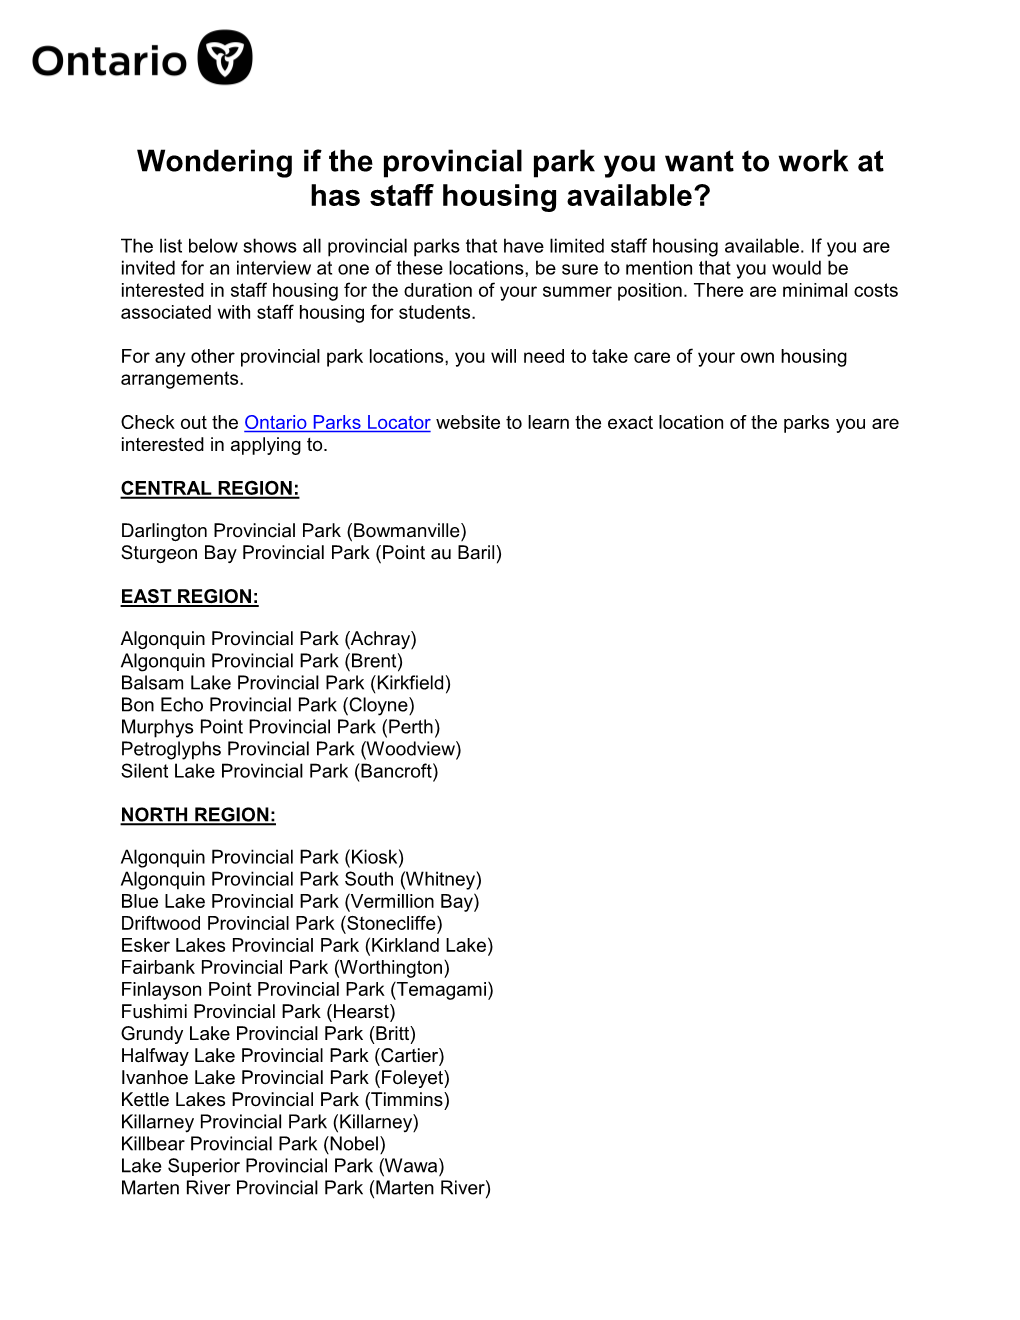 List of Provincial Parks with Staff Housing